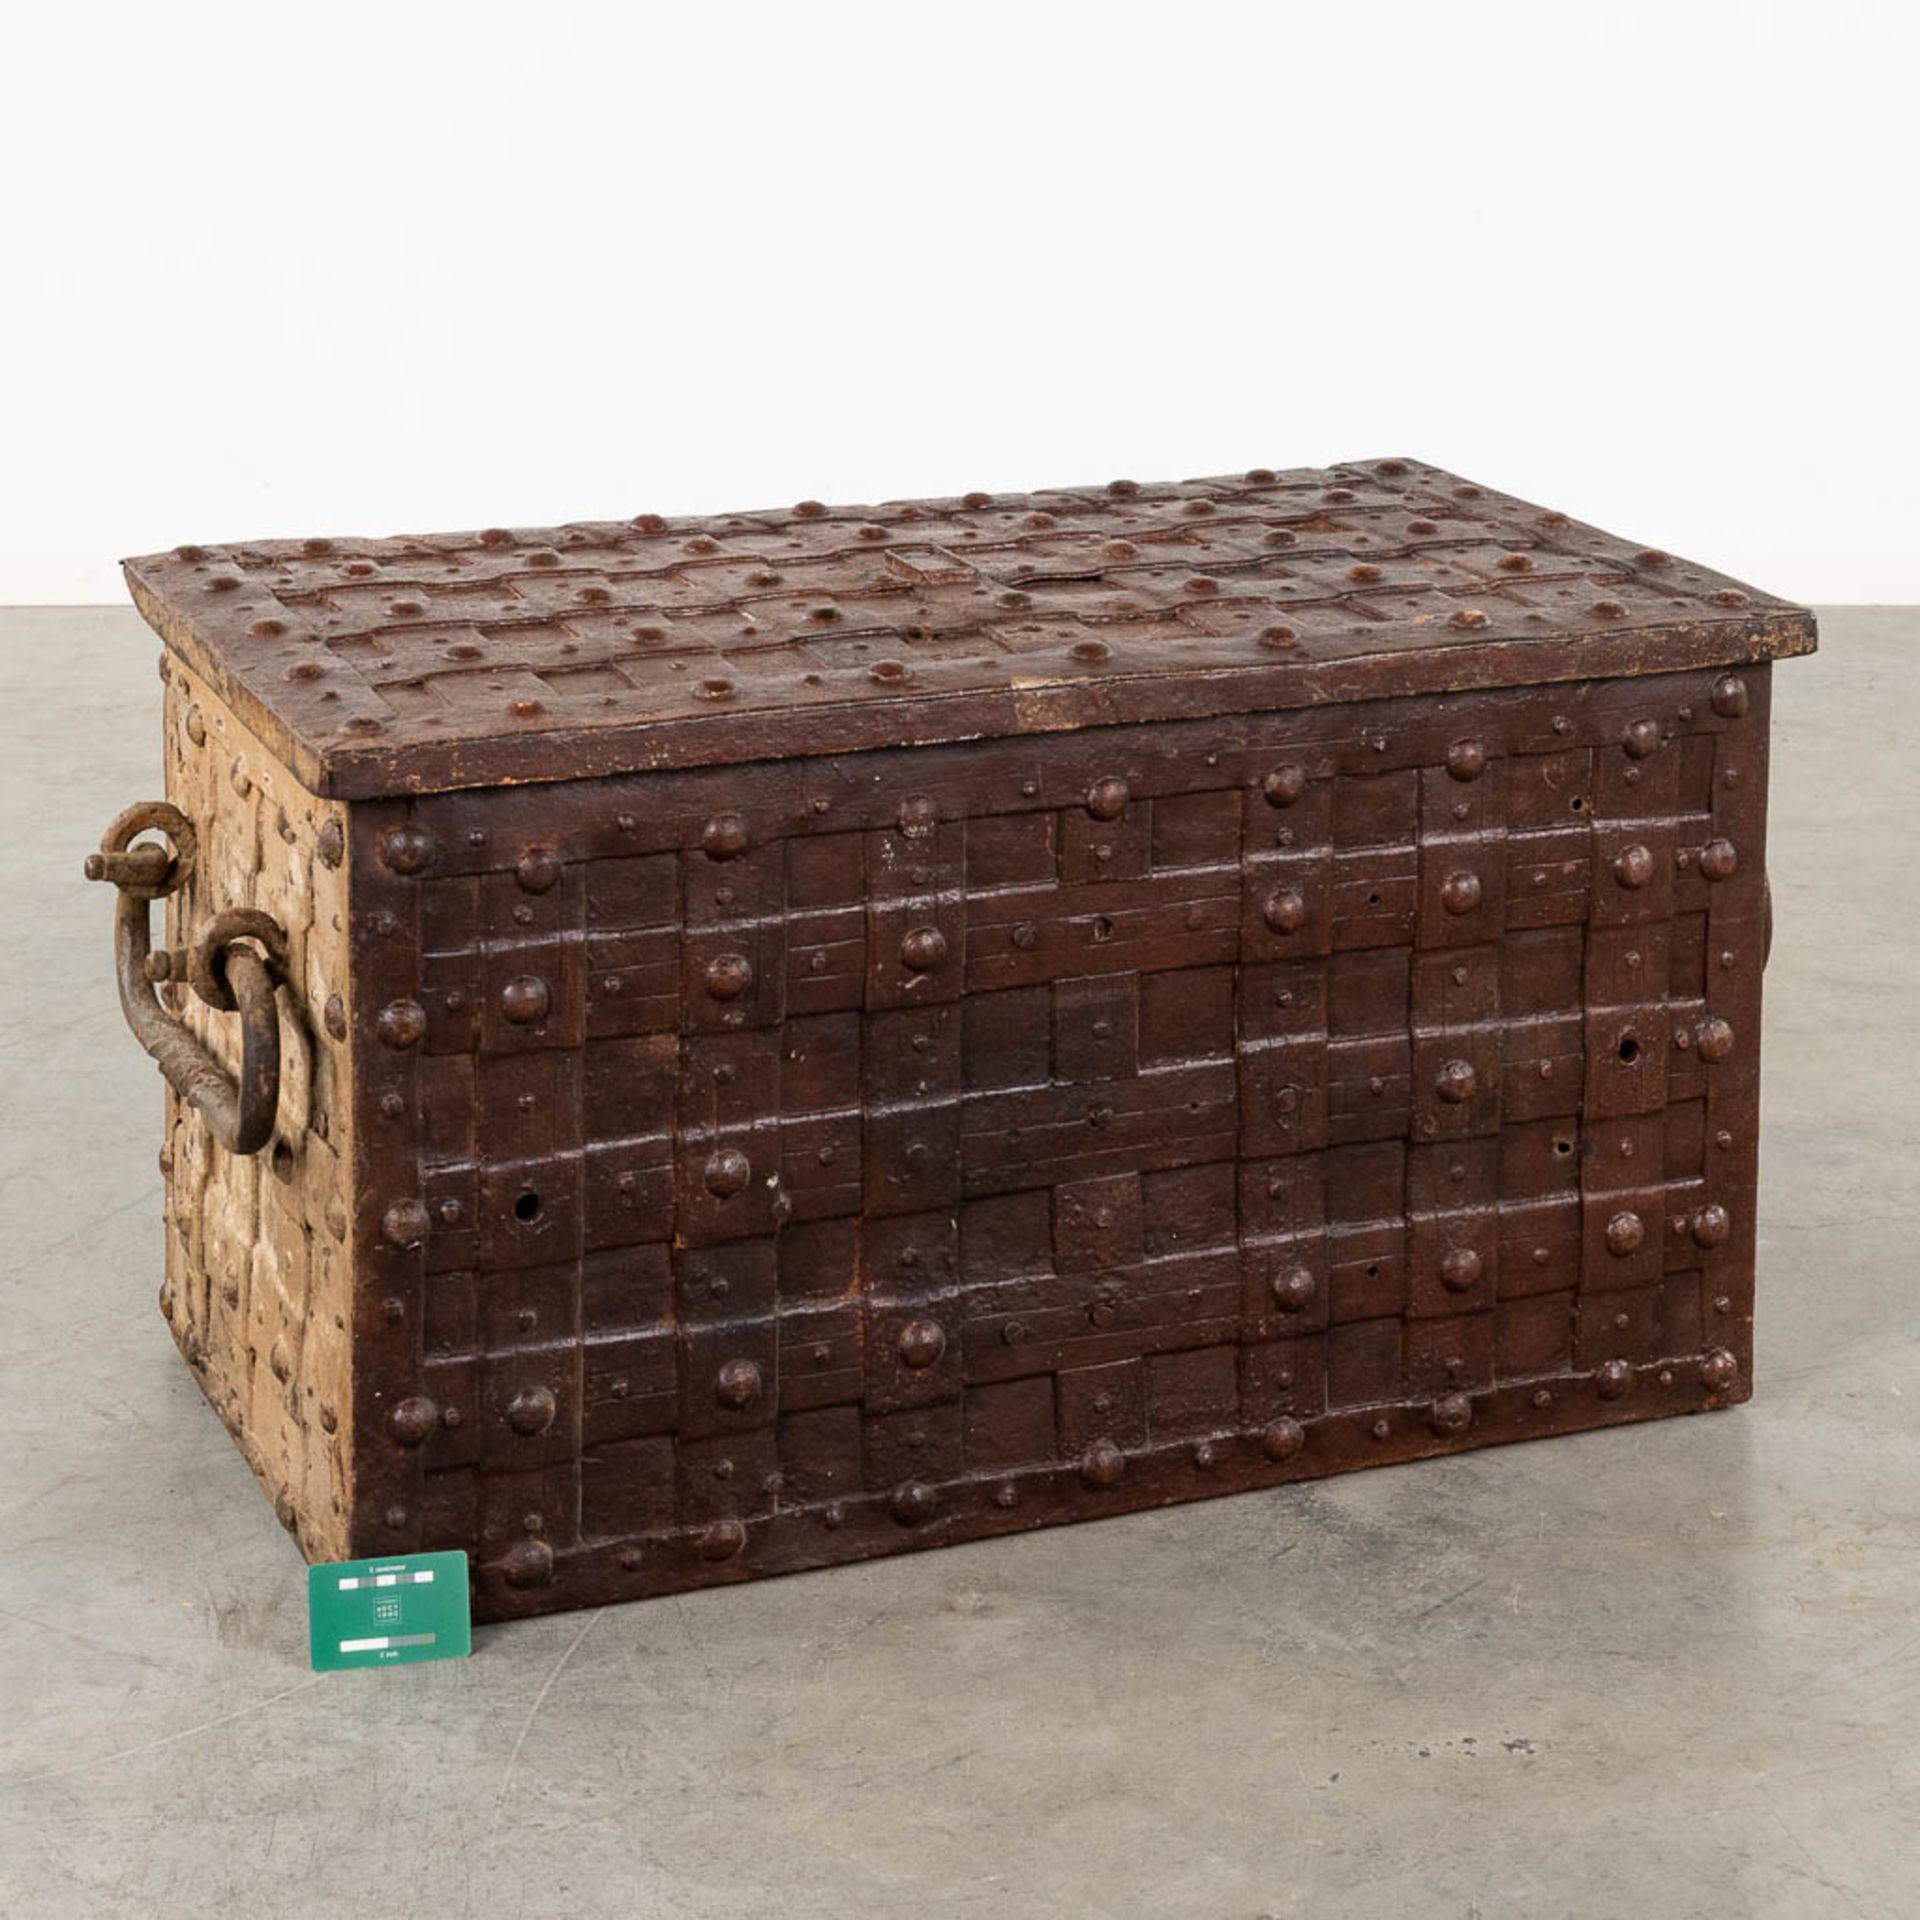 An antique metal chest in the style of Nuremberg chests, with a wrought iron exterior. 18th C. (D:51 - Image 2 of 9